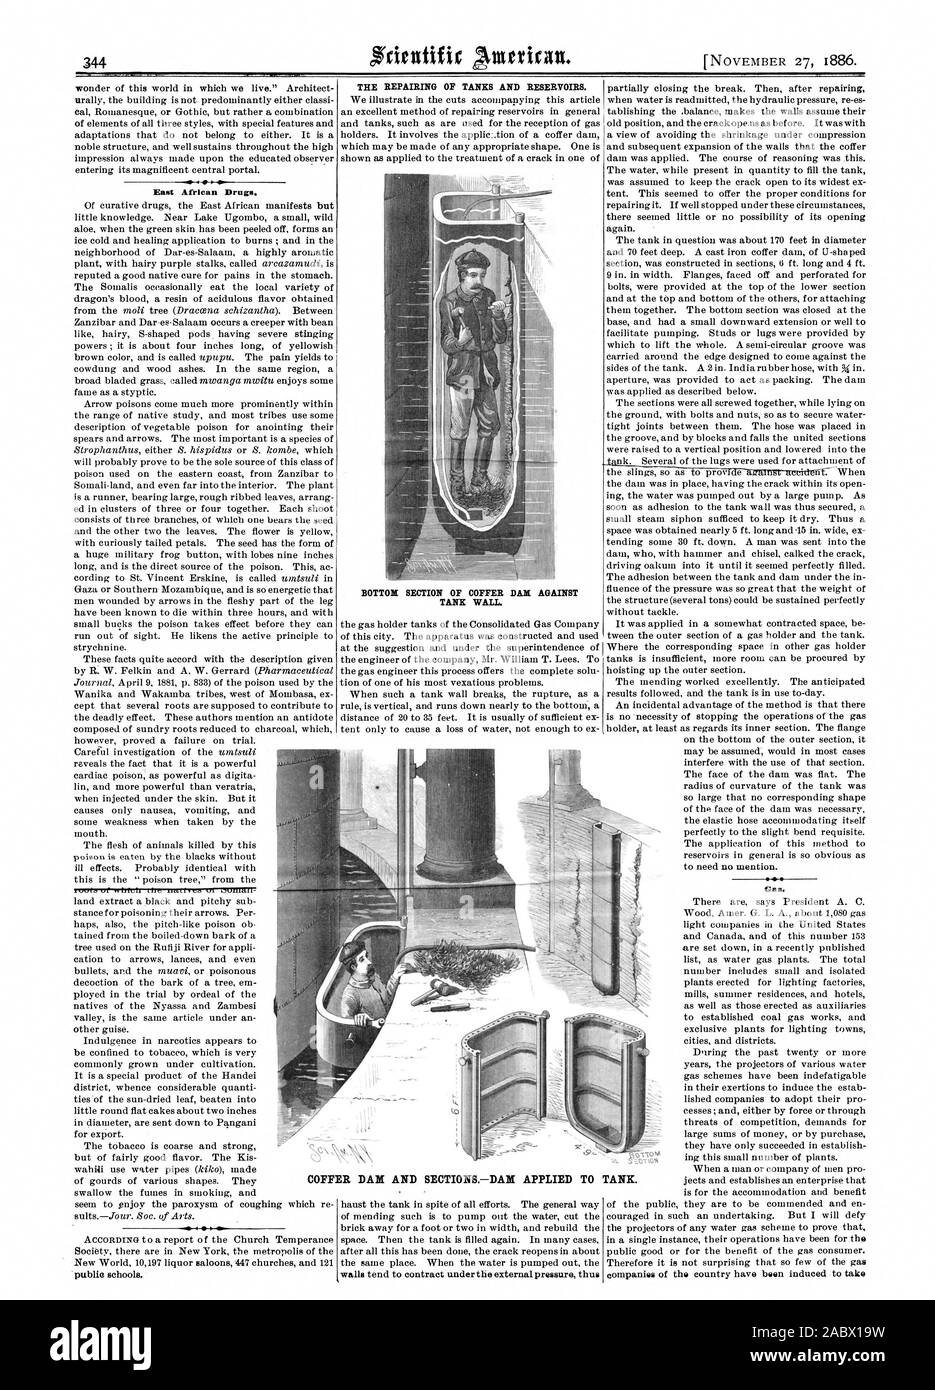 East African Drugs. public schools. walls tend to contract under the external pressure thus Gas. COFFER DAM AND SECTIONSDAN APPLIED TO TANK., scientific american, 1886-11-27 Stock Photo